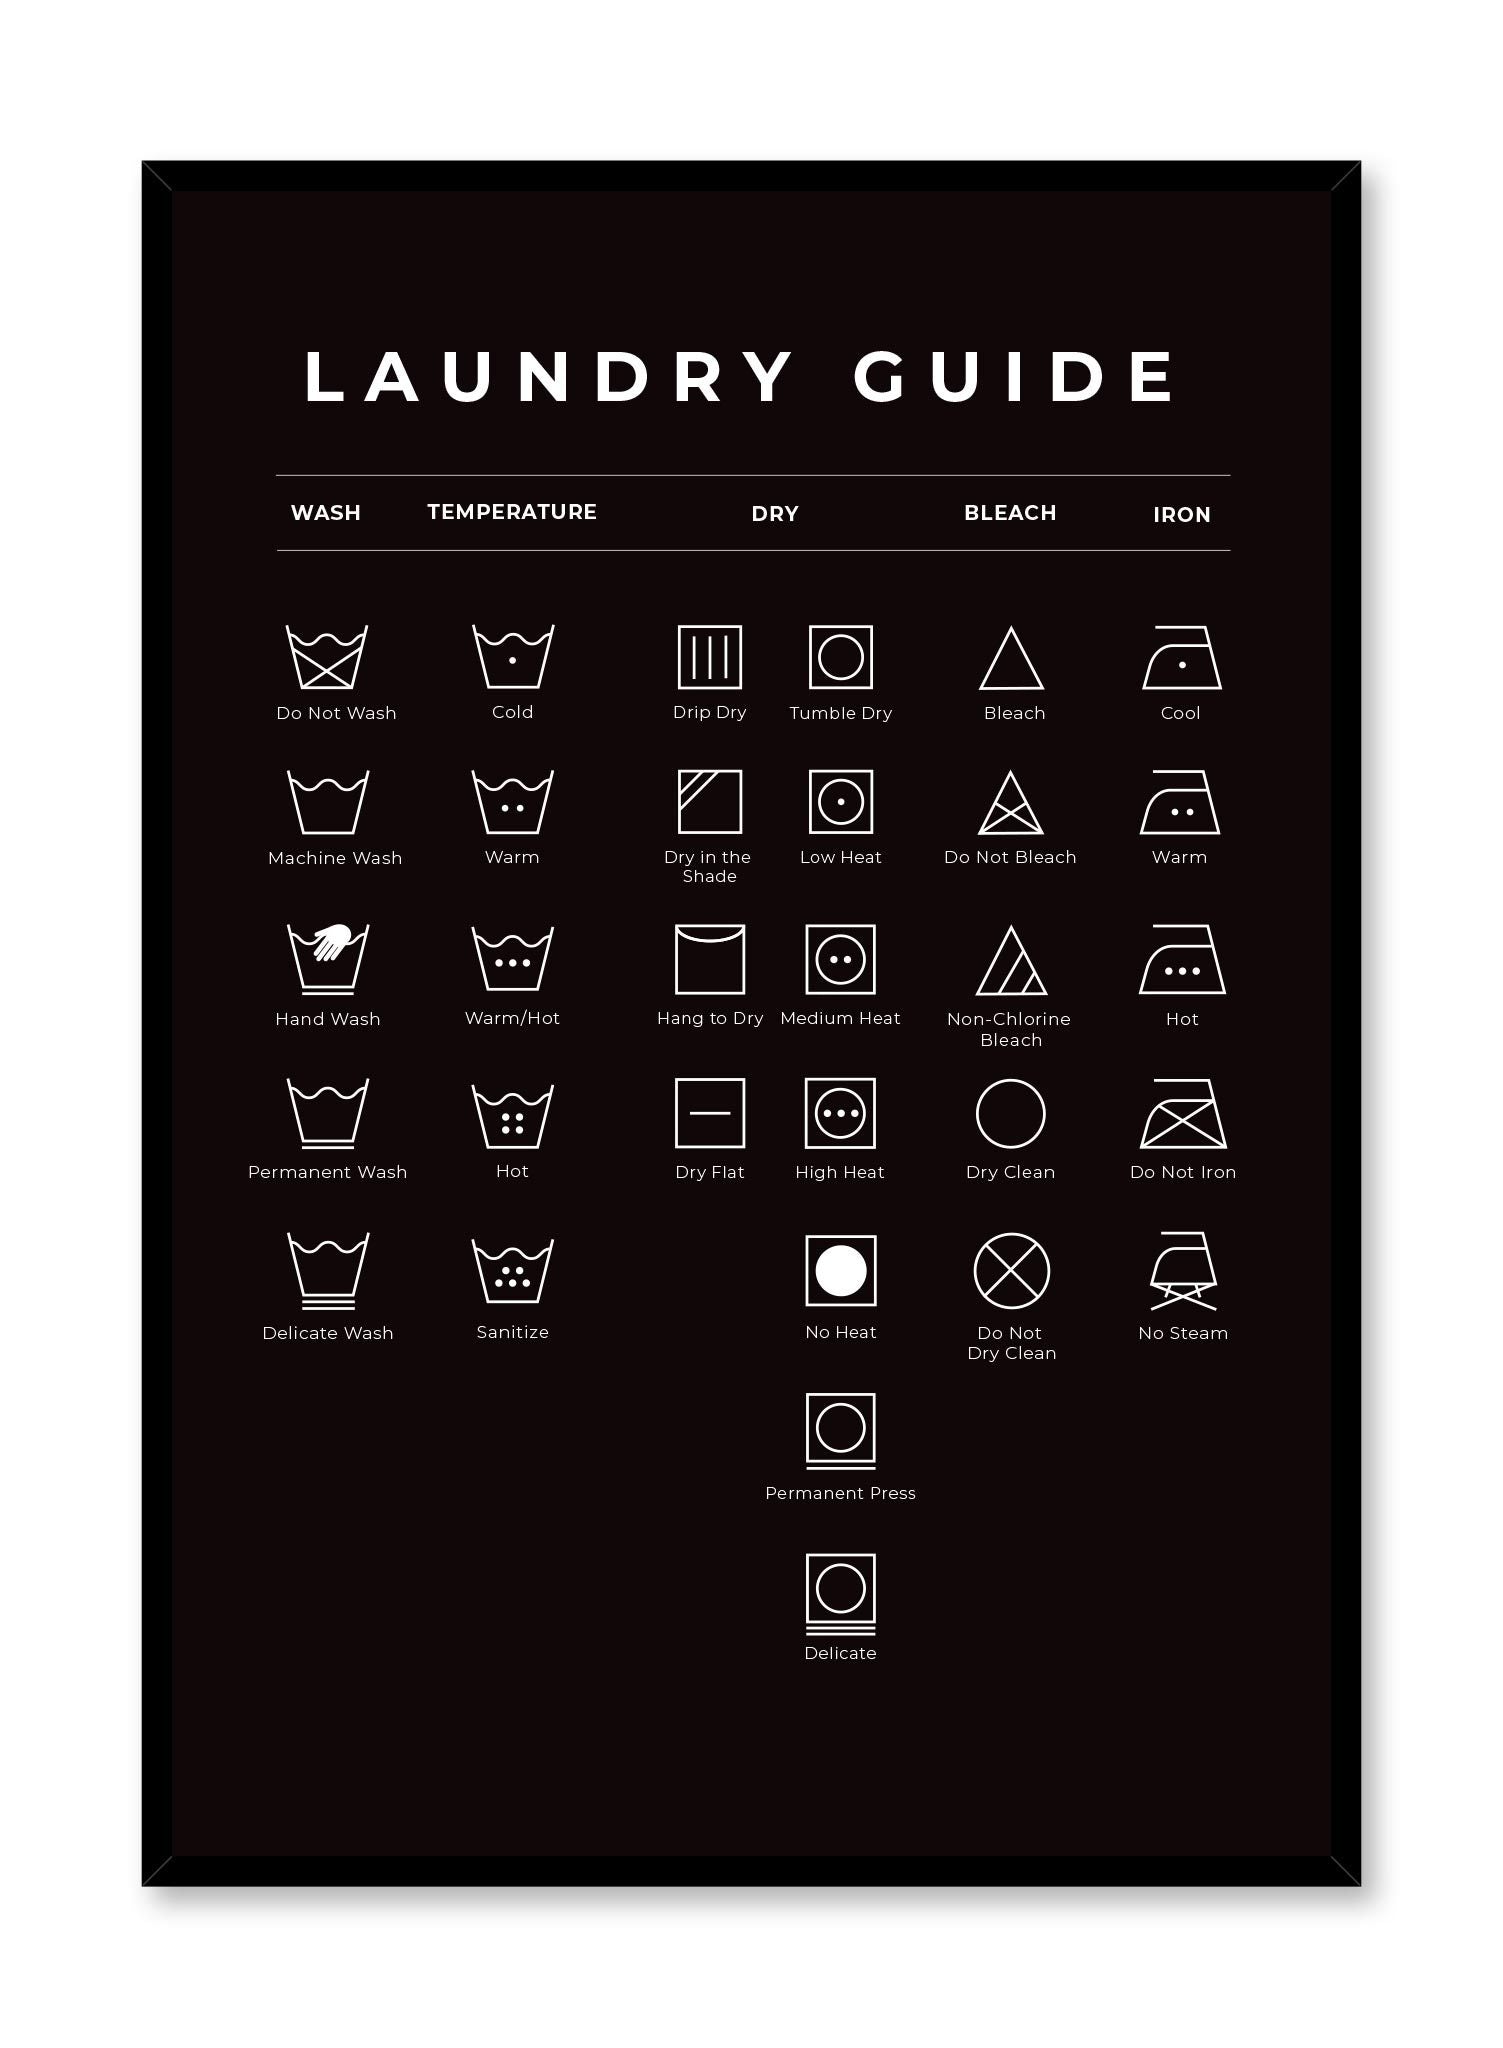 Laundry Guide in Black is a minimalist typography by Opposite Wall of a chart of laundry symbols and their meaning.